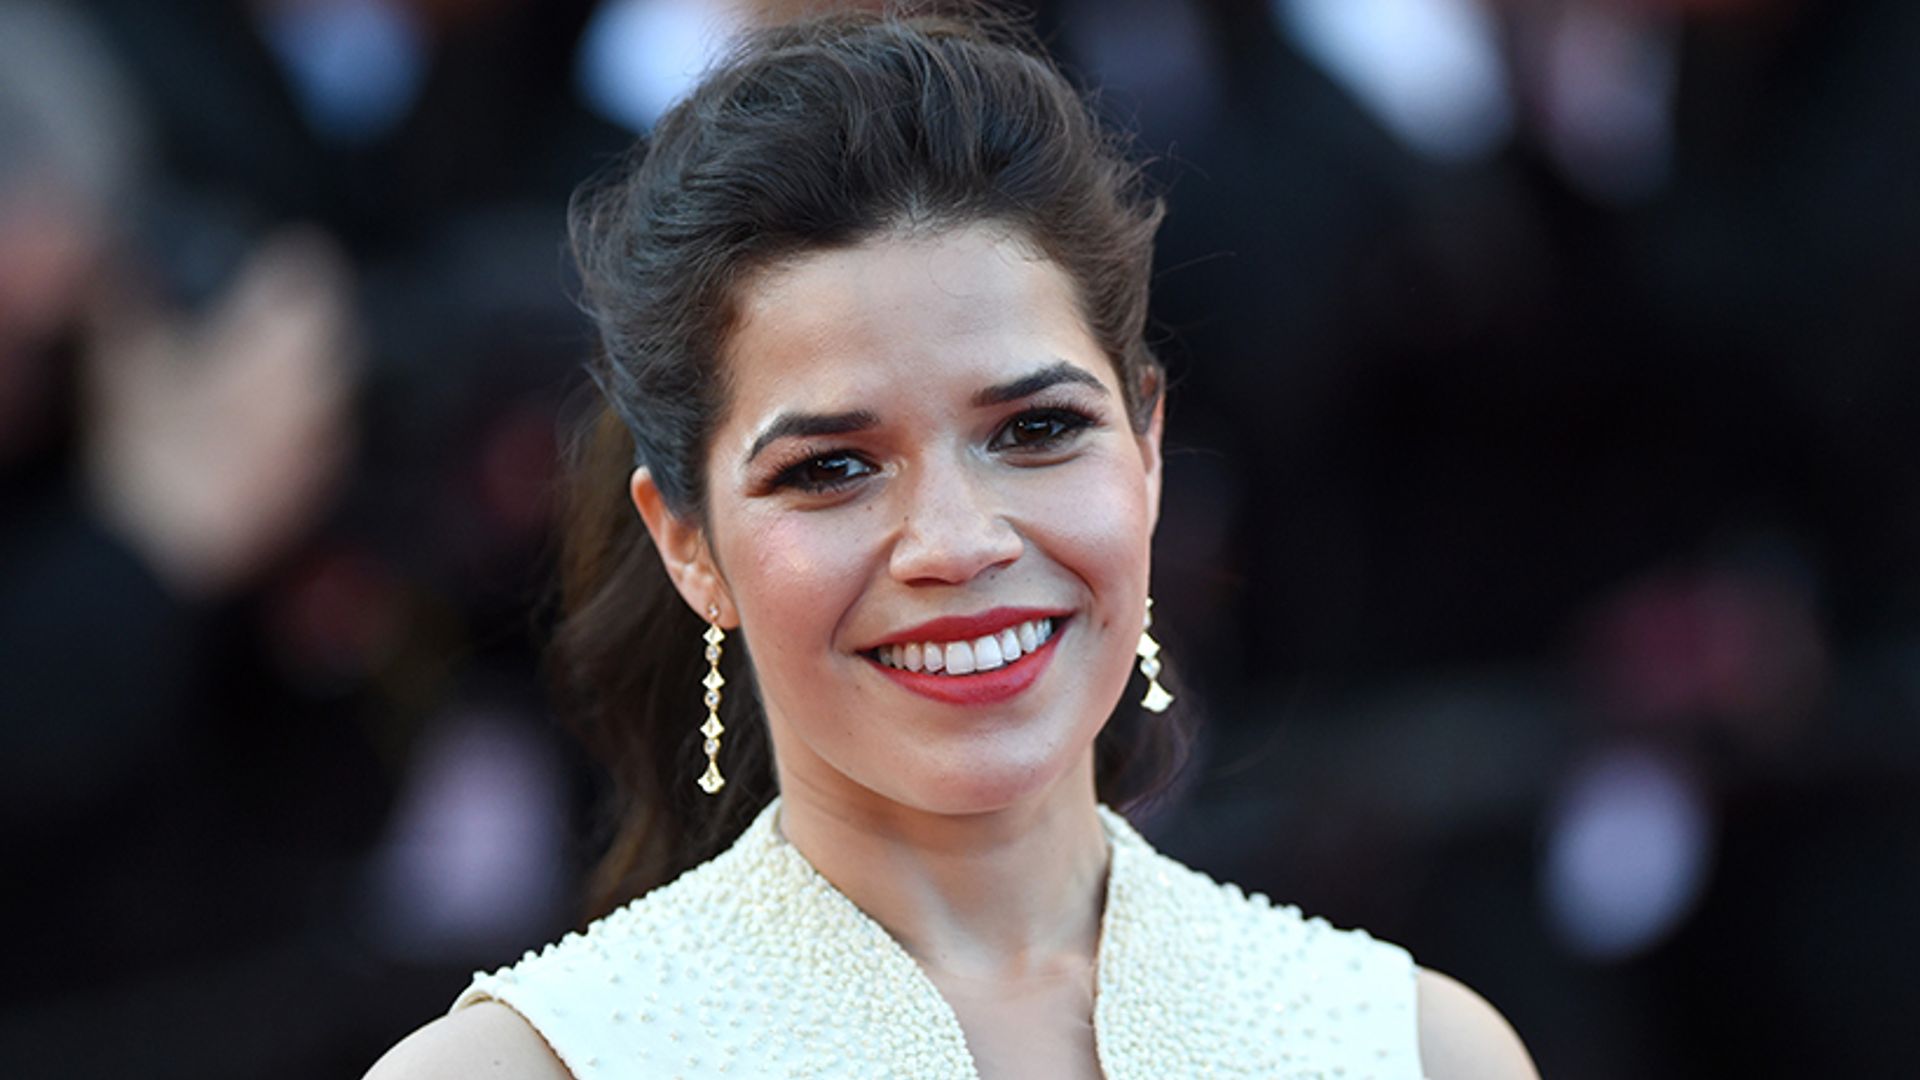 Ugly Betty's America Ferrera welcomes first child and shares photo – see adorable nickname